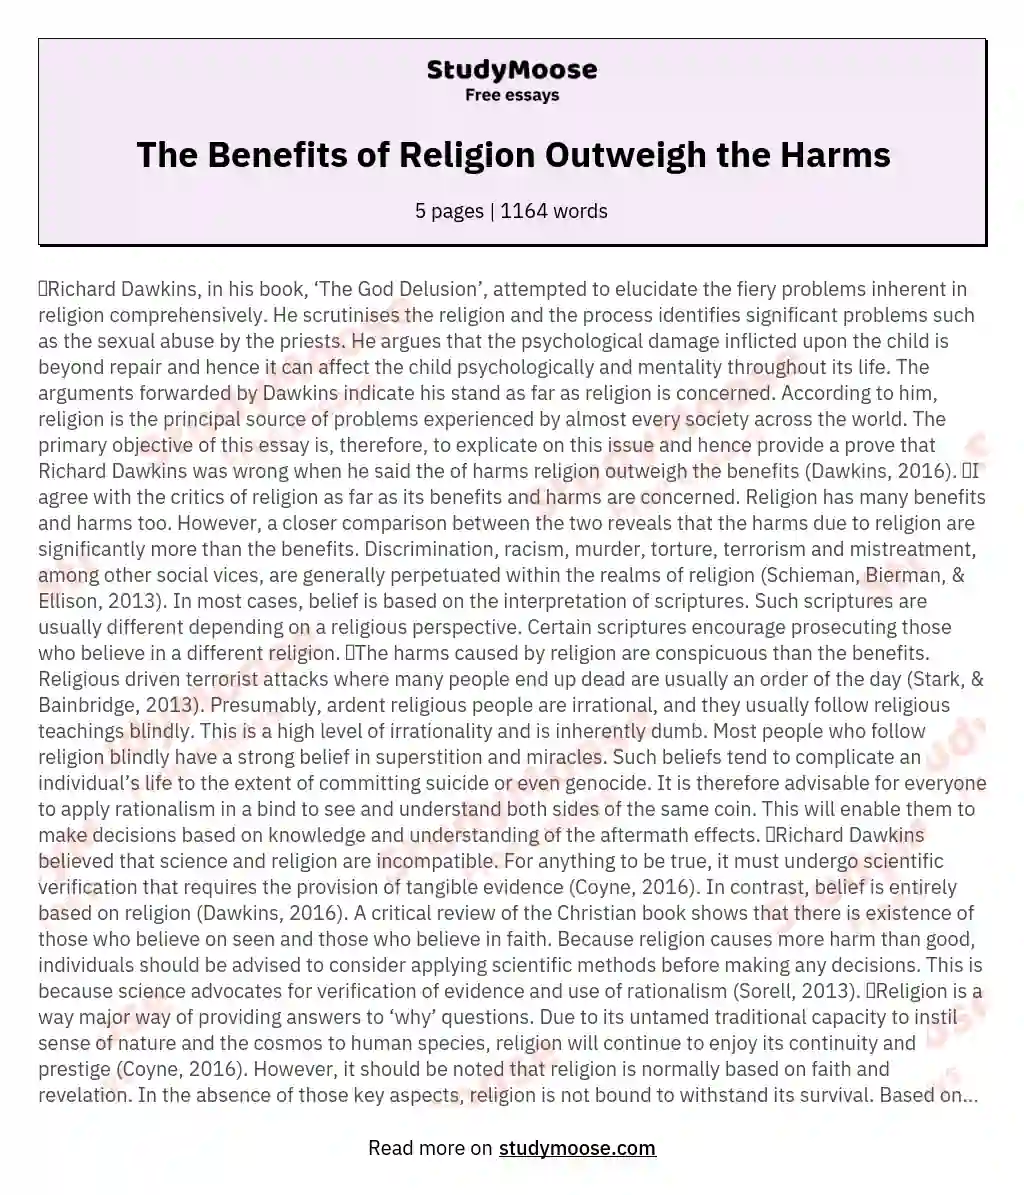 The Benefits of Religion Outweigh the Harms essay